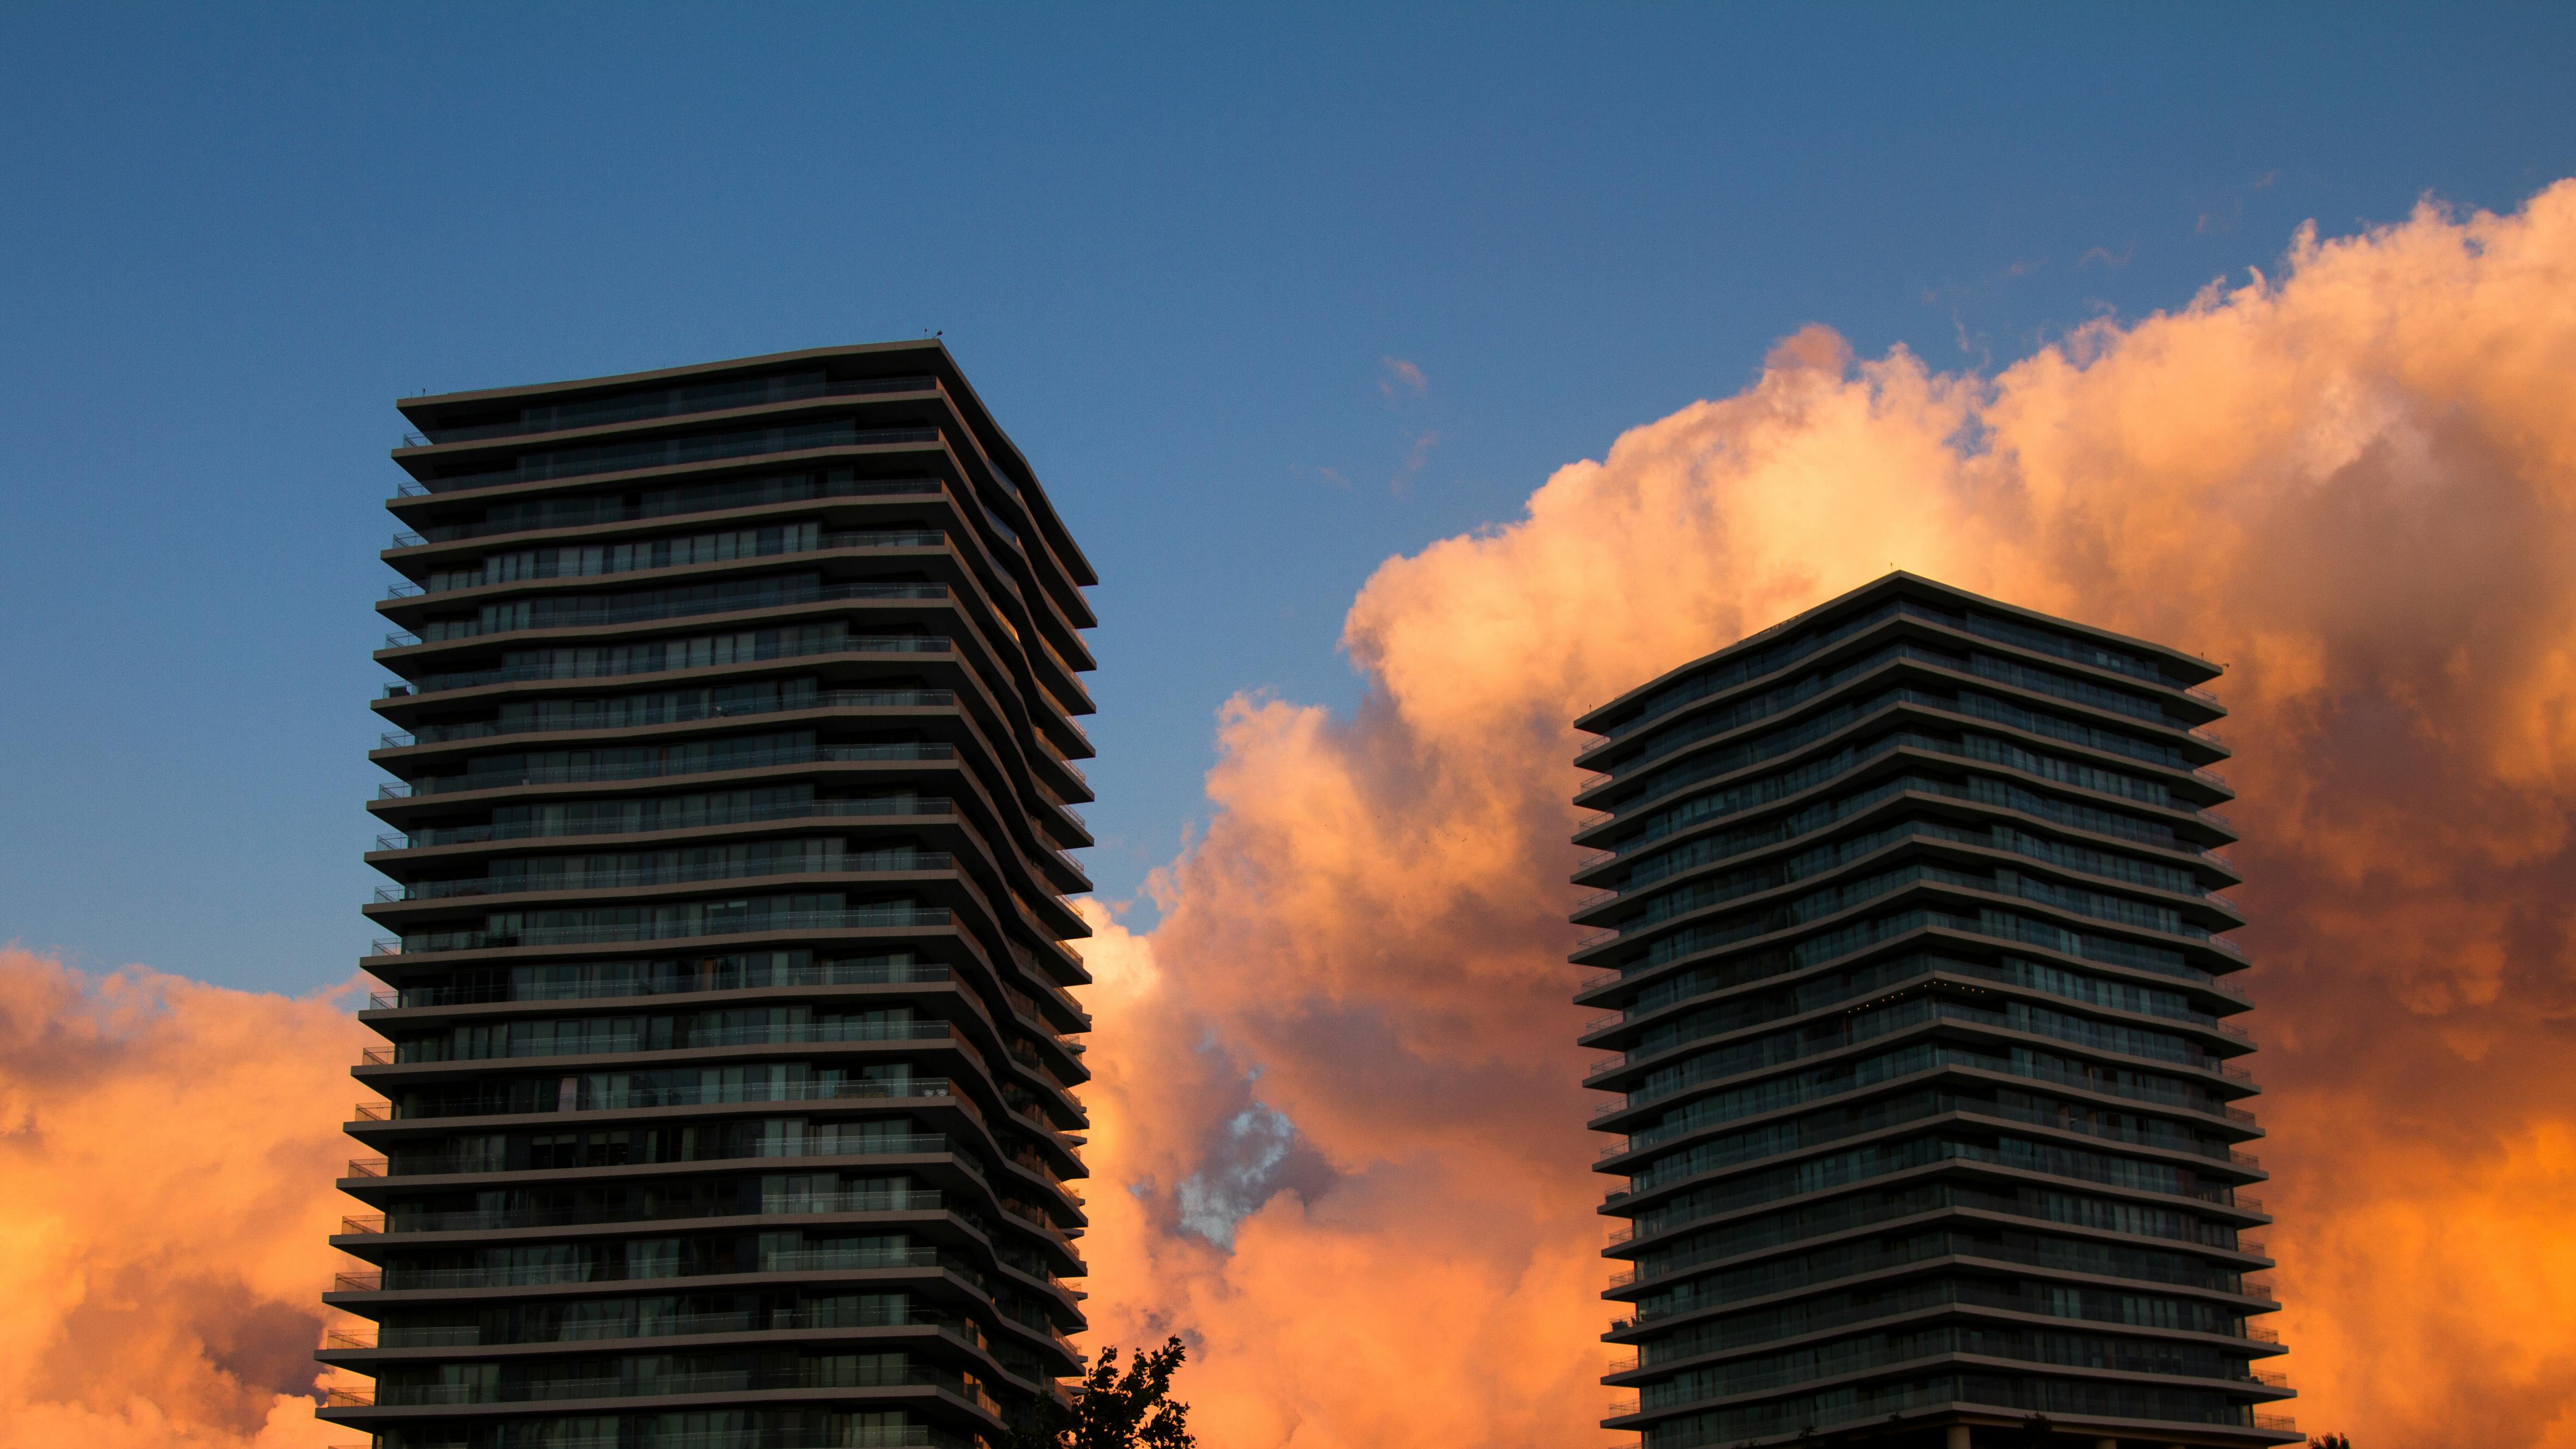 Free stock photo of blue sky, buildings, red sky